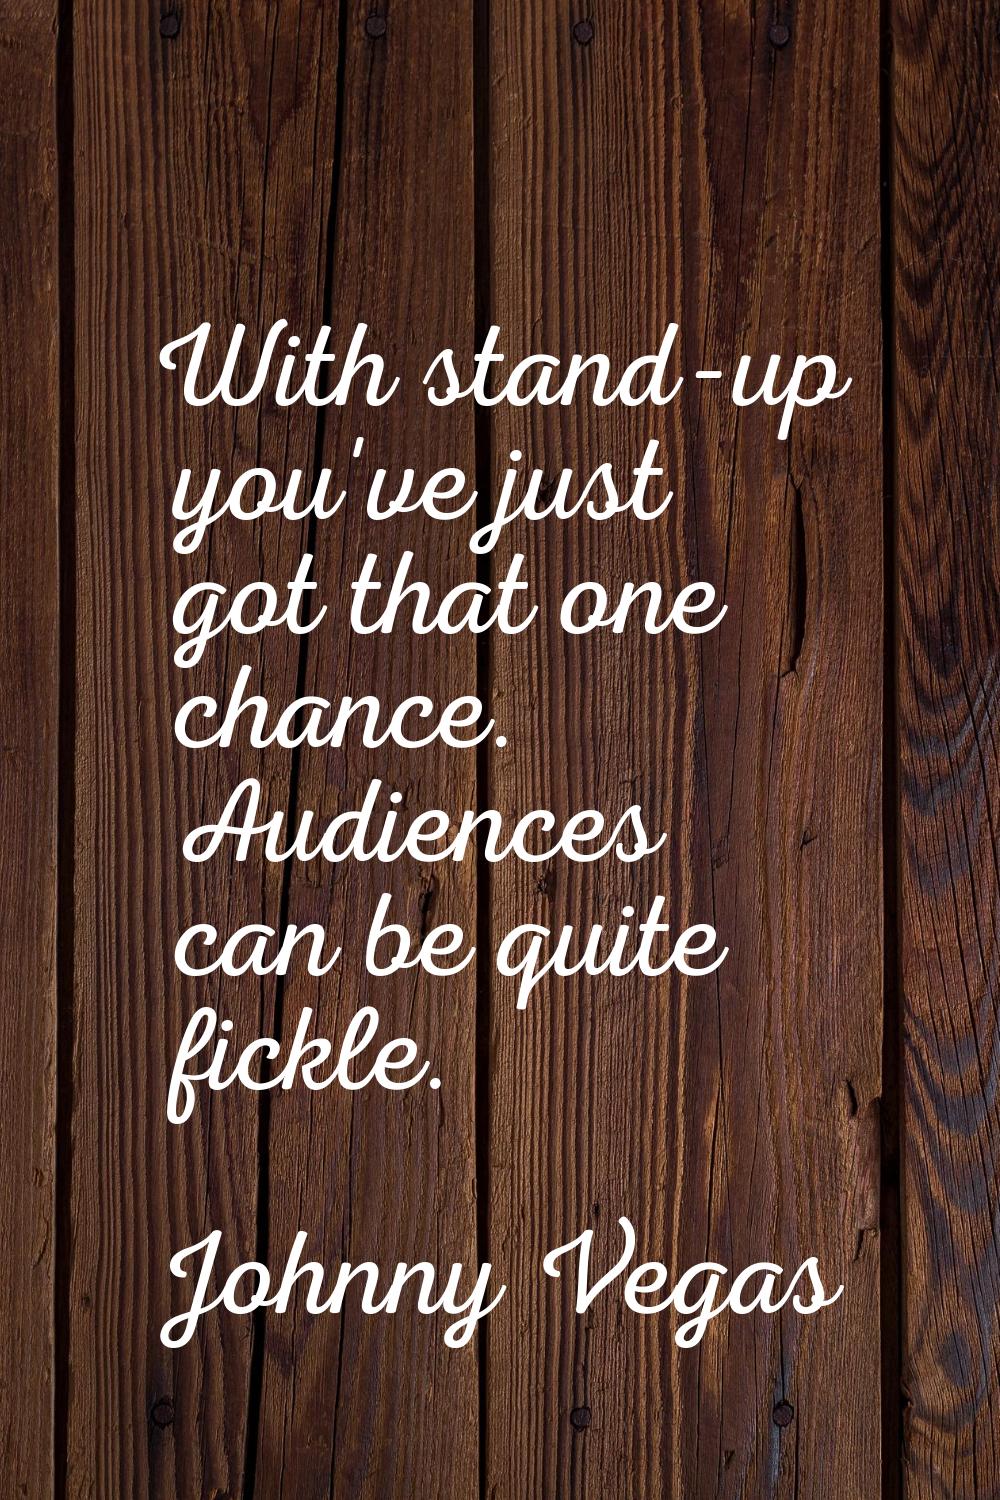 With stand-up you've just got that one chance. Audiences can be quite fickle.